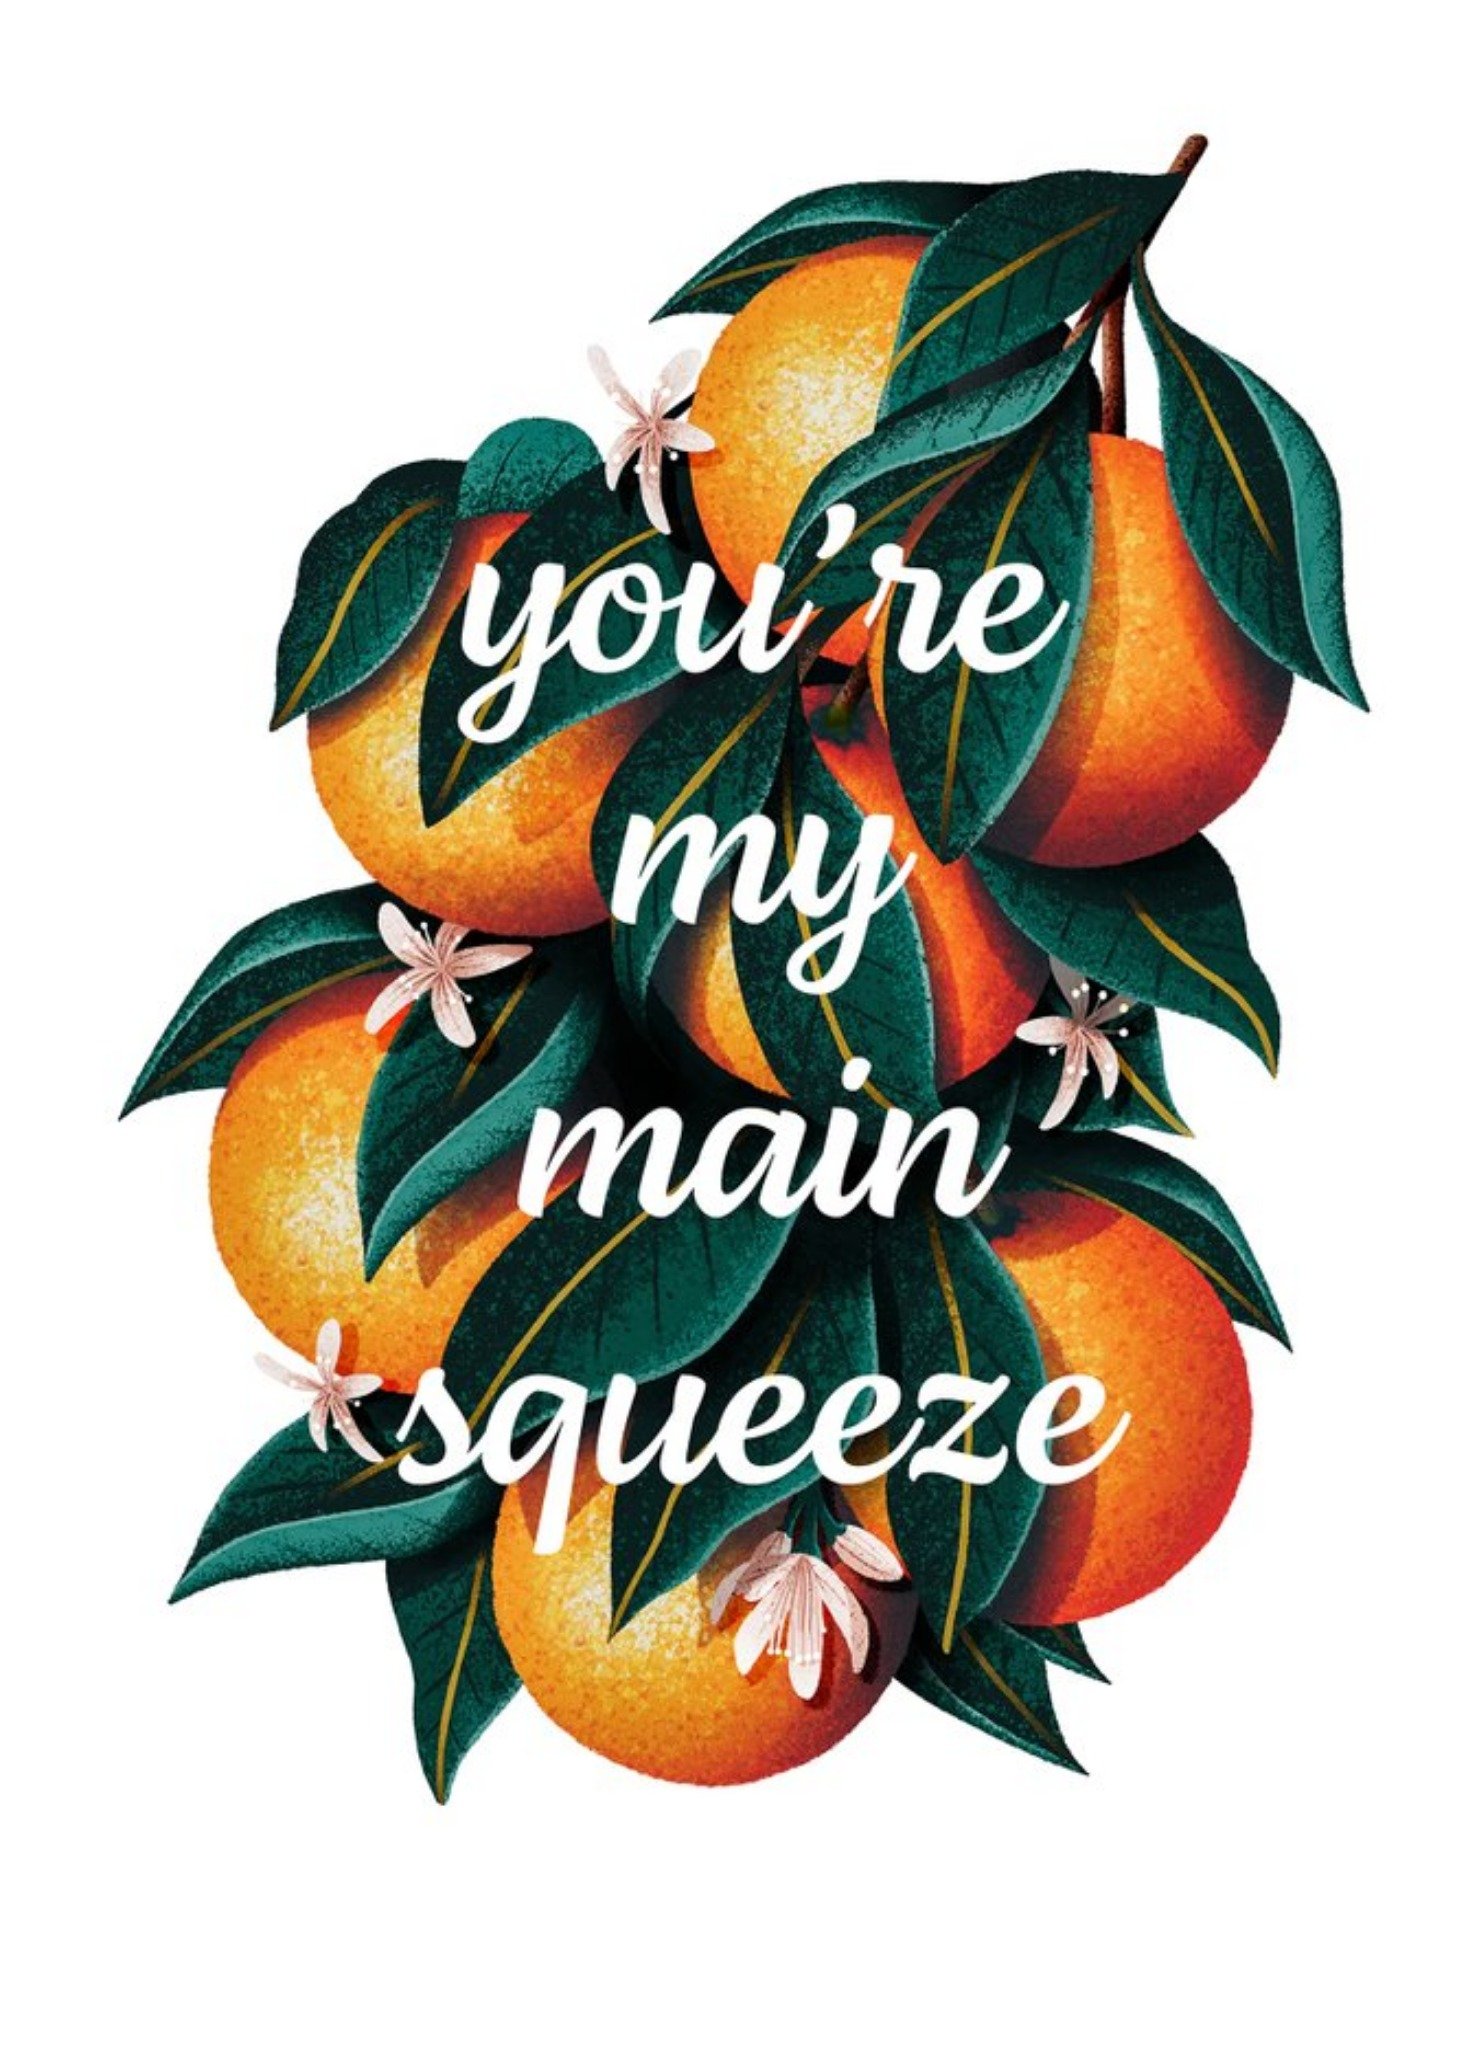 Moonpig Folio Illustration Of Some Oranges Growing On A Tree. You're My Main Squeeze Birthday Card E